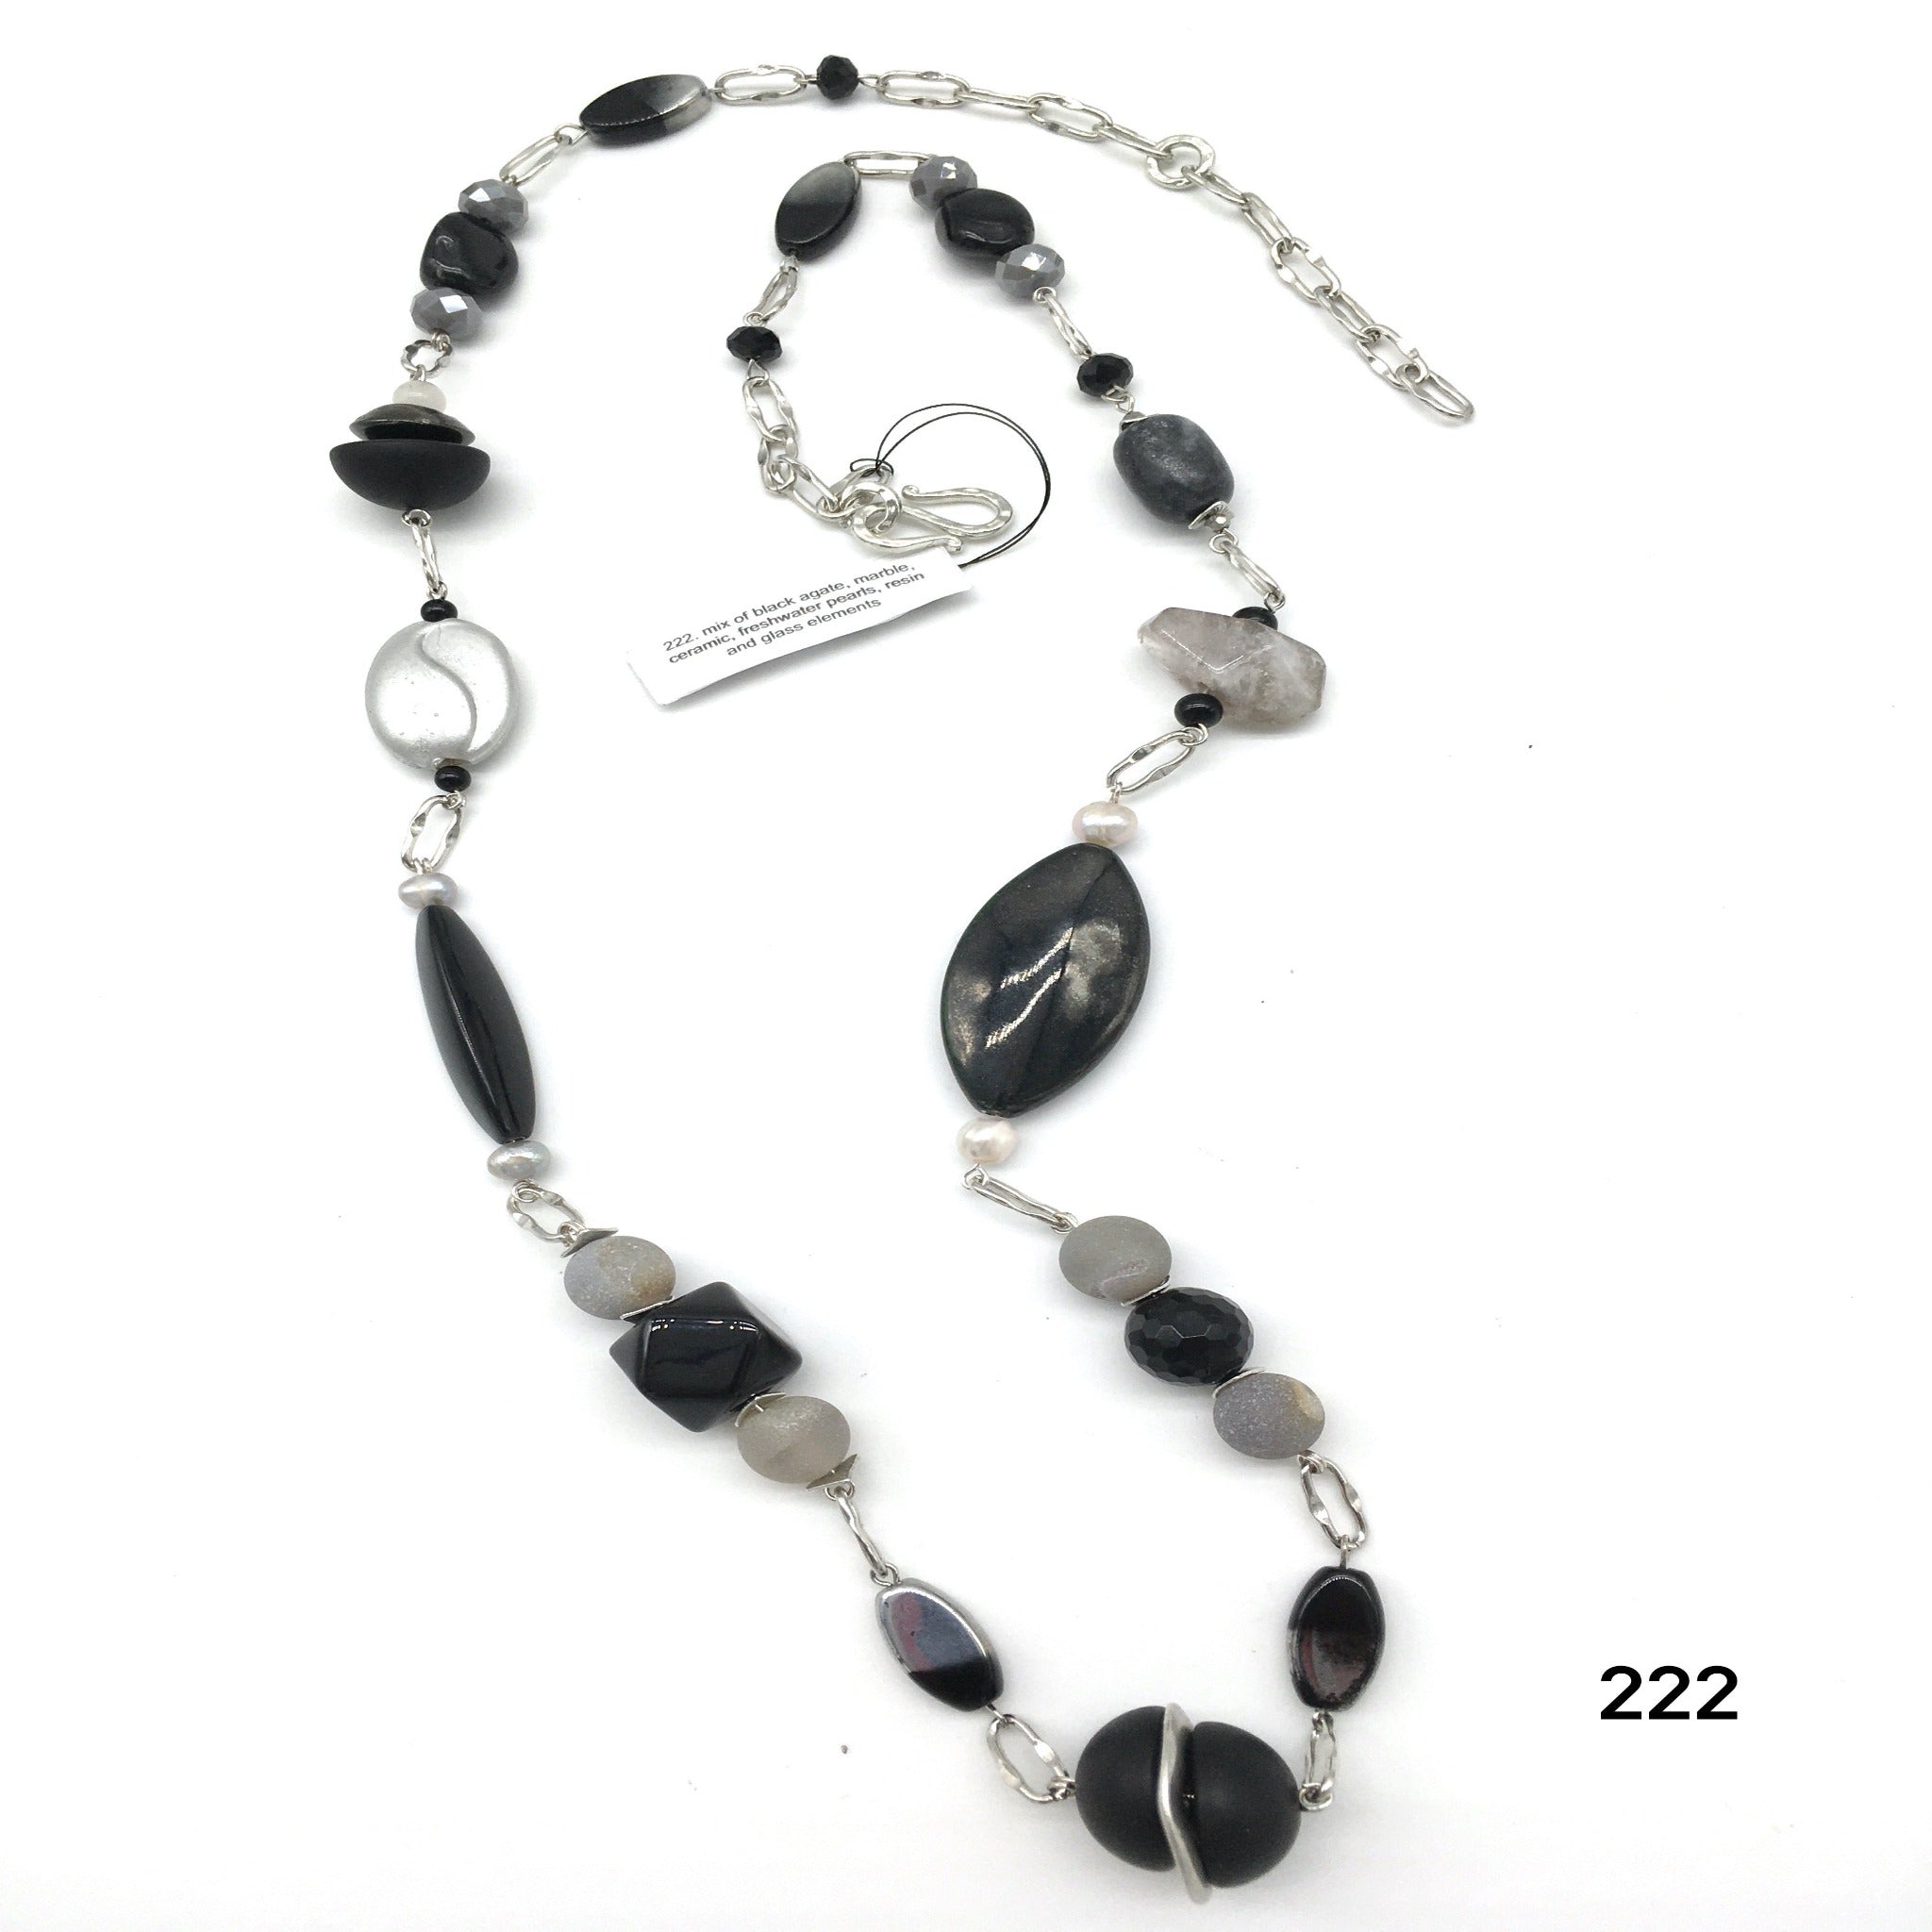 Mix of black agate, marble, ceramic, freshwater pearls, resin and glass elements necklace created by Dorothea Drew Design from central NJ